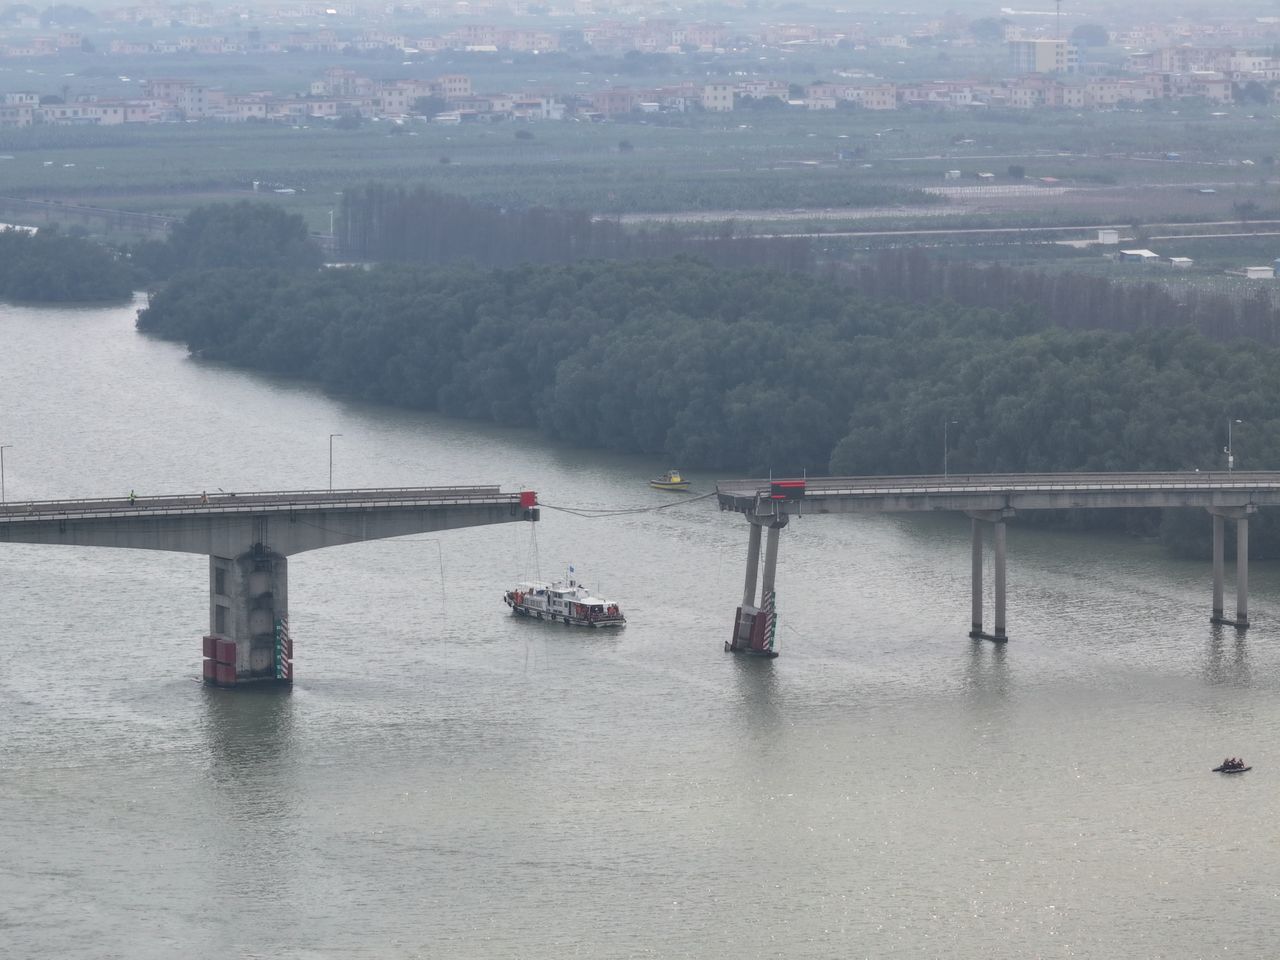 Cargo ship collision at Lixinsha Bridge results in fatalities and missing persons in Guangzhou